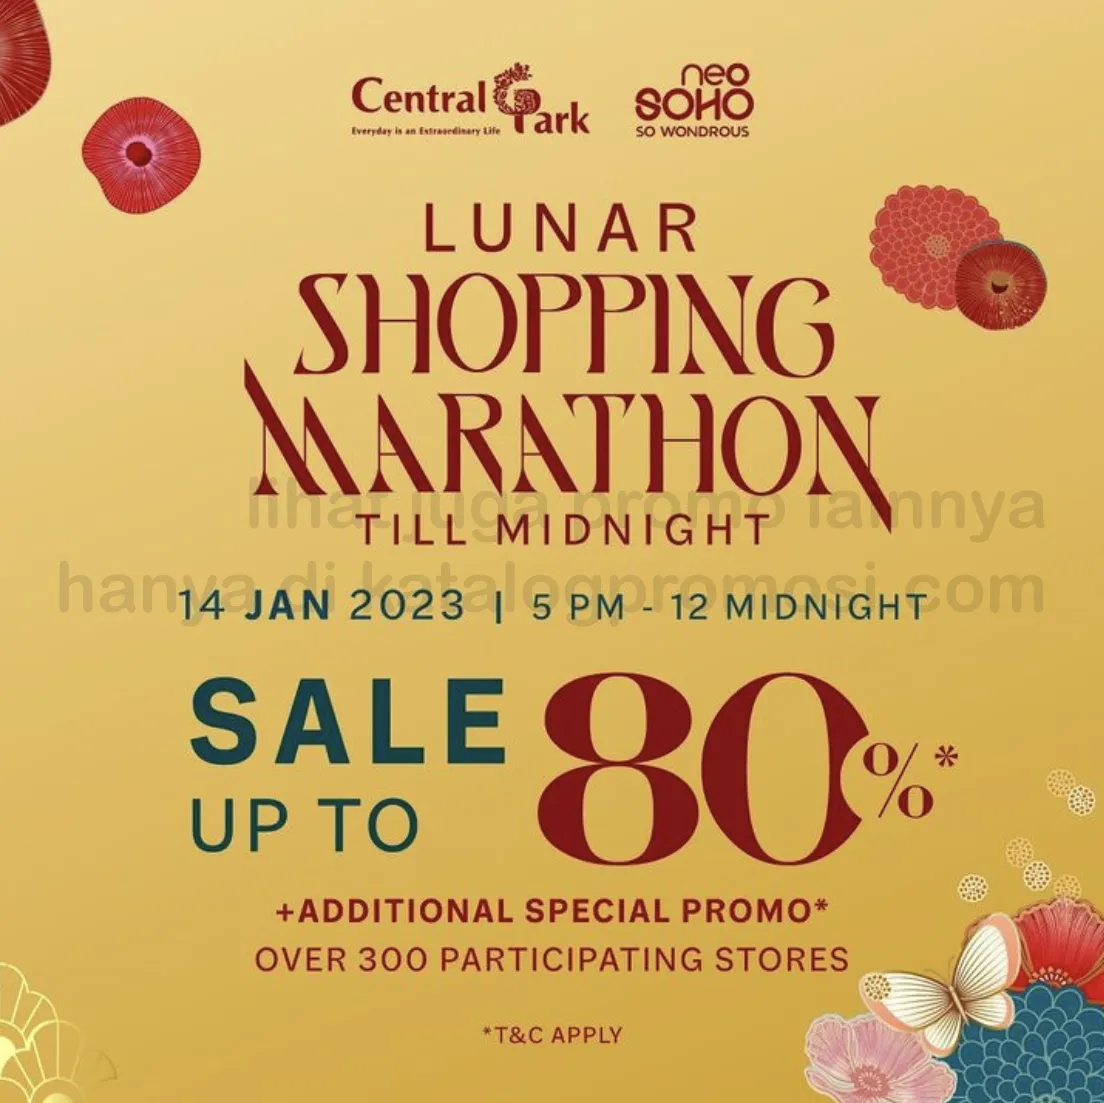 PROMO CENTRAL PARK MALL LUNAR SHOPPING MARATHON TILL MIDNIGHT SALE up to 80% off